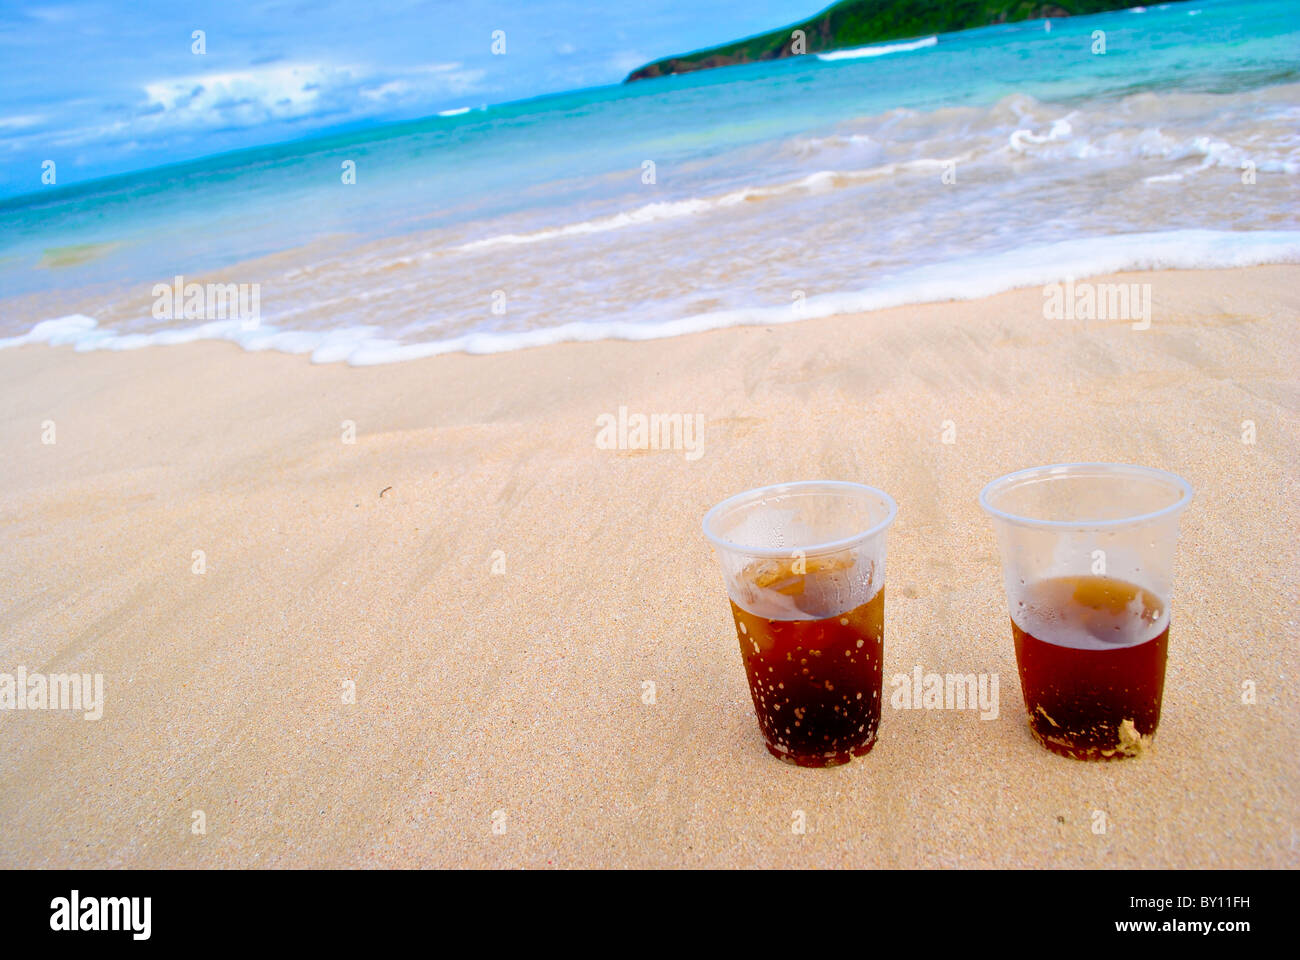 Two rum glasses on the beach. Stock Photo